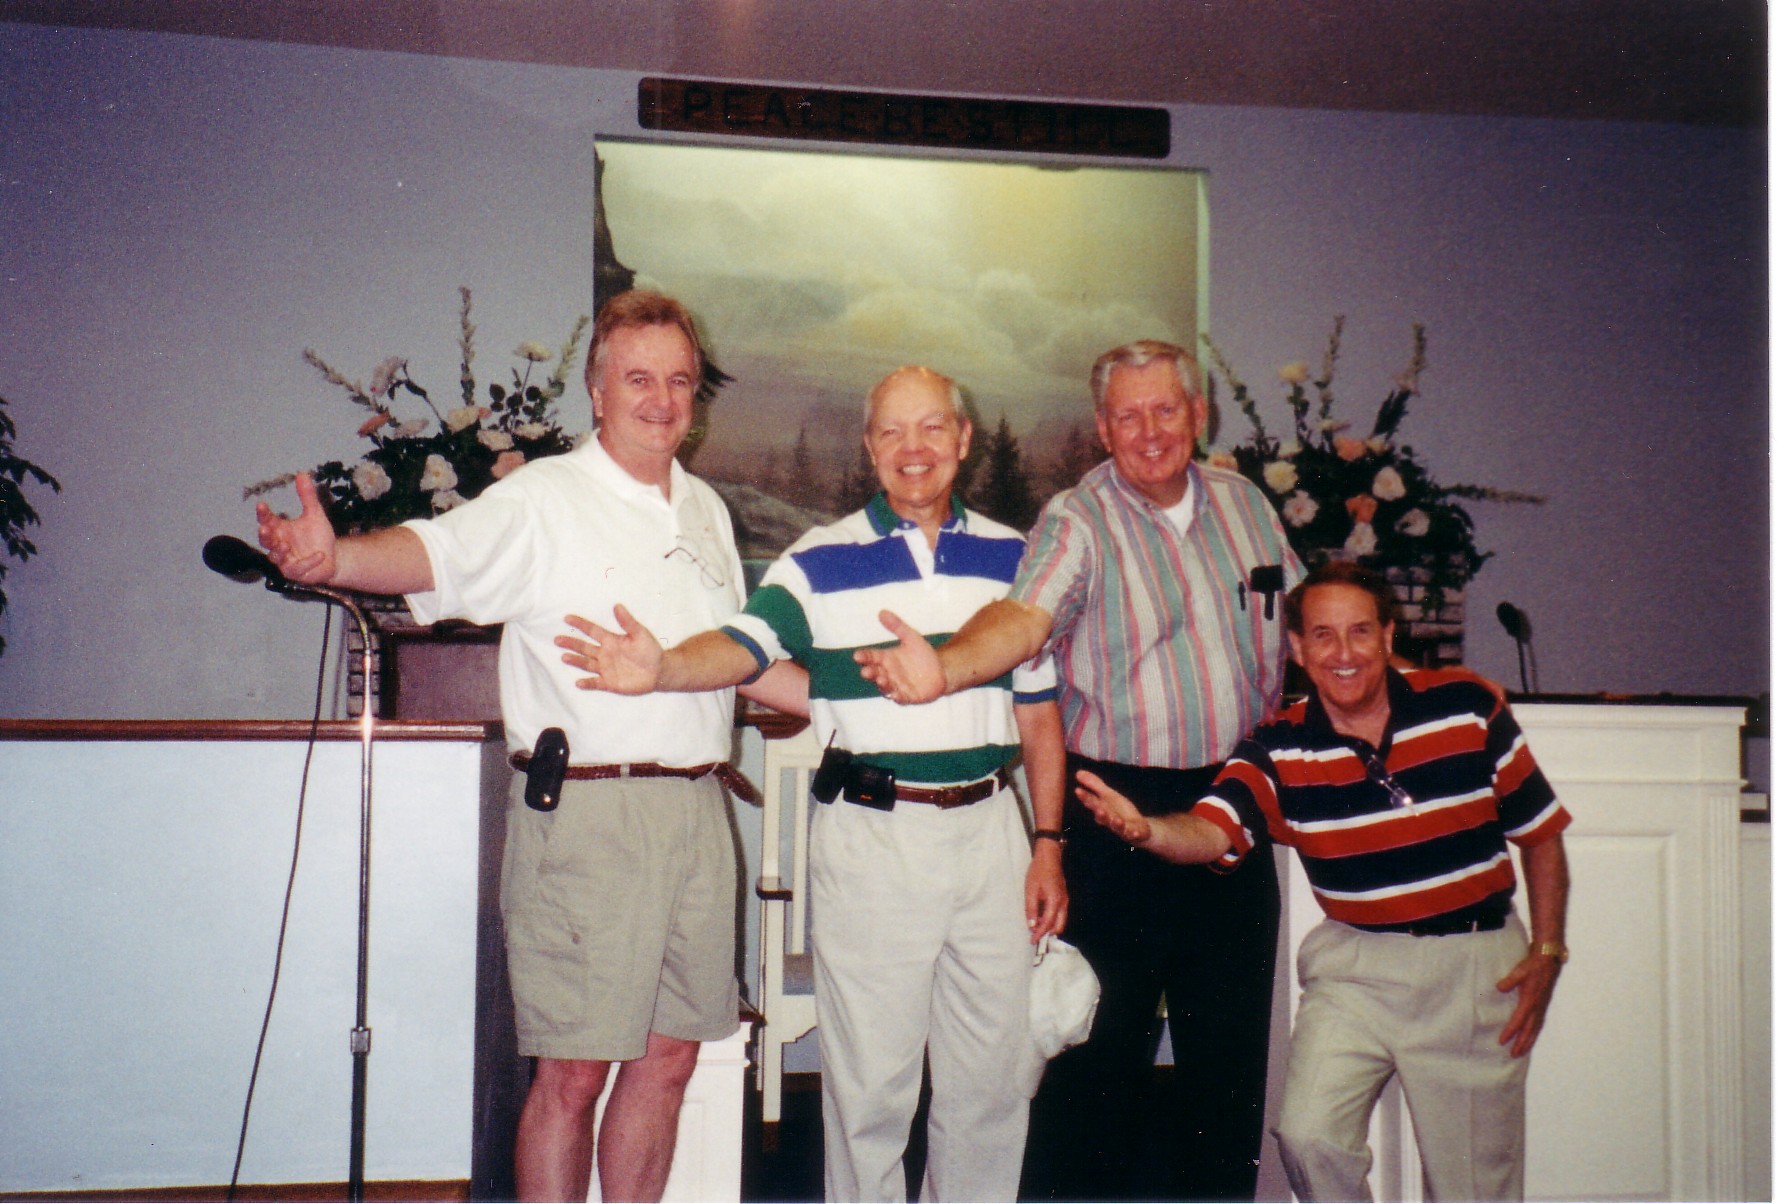 RE-ENACTING THEIR SR. MINSTREL NUMBER ARE: HOWARD HUMPHREYS, JOHN KOSKINEN, DALE GRIFFITH AND SUB - BILL MARTIN- IN FOR BILL HURTZ.  THIS PHOTO WAS TAKEN IN THE REMODELED ASHLAND HIGH AUDITORIUM, WHICH IS NOW A CHURCH.